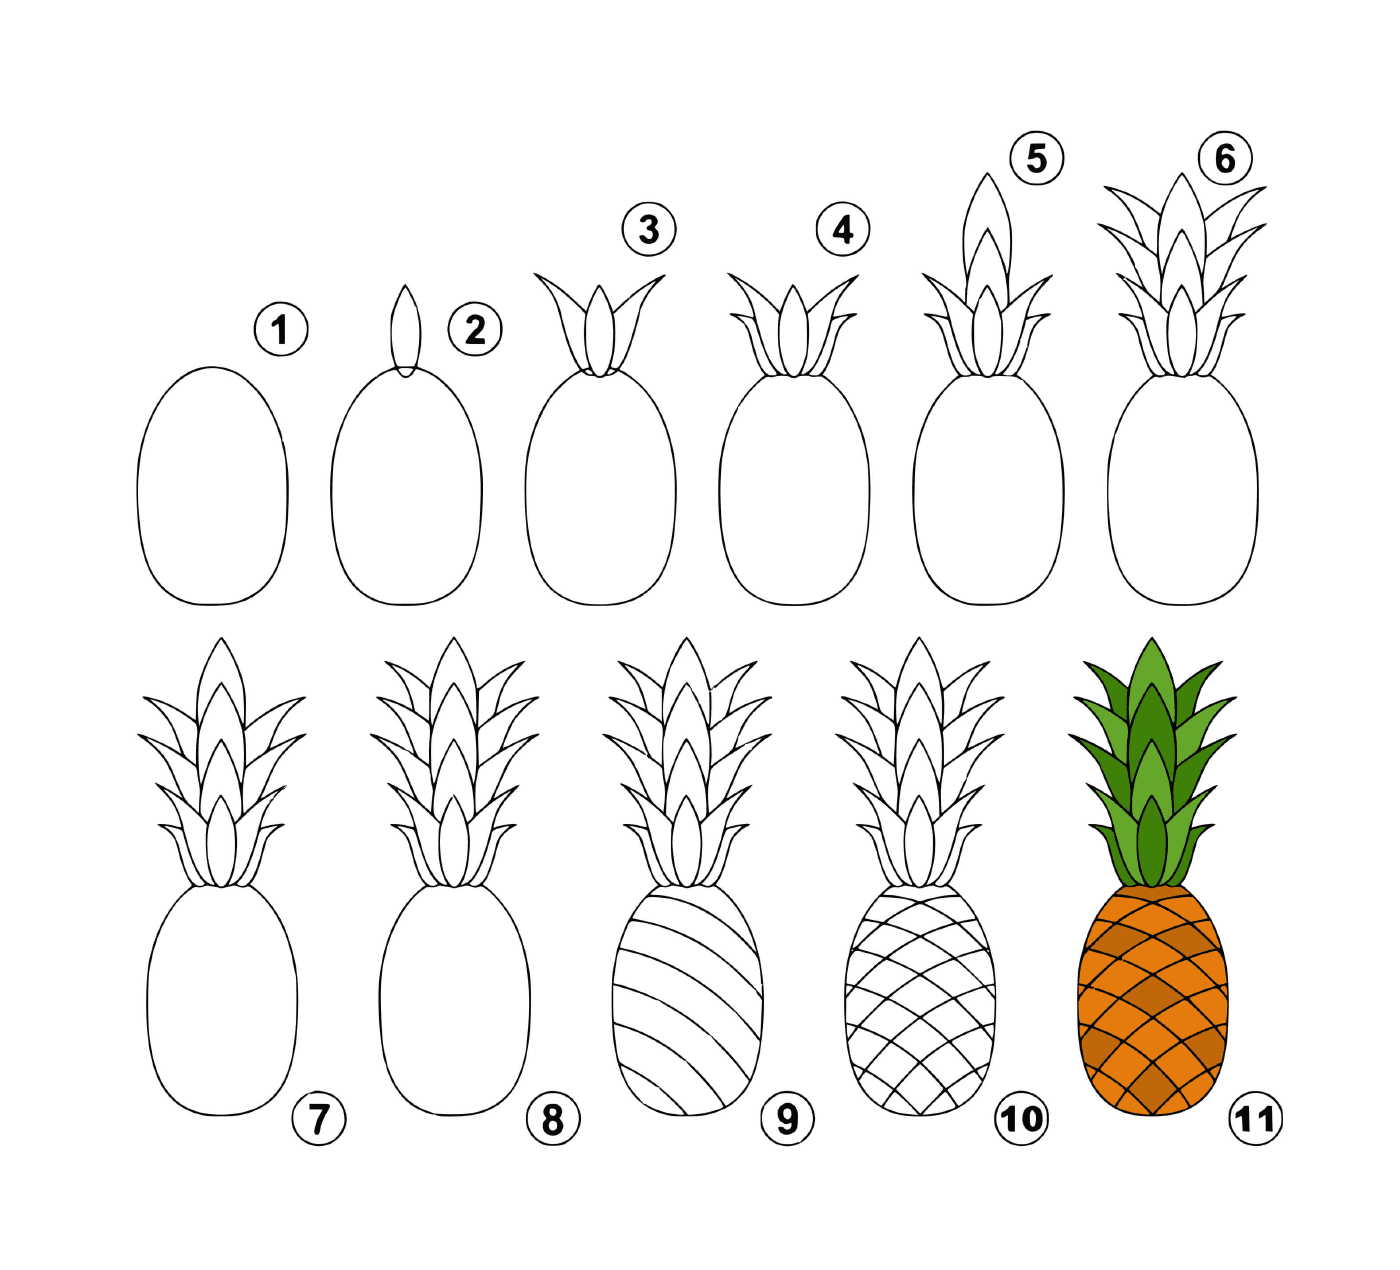  How to draw a pineapple easily 